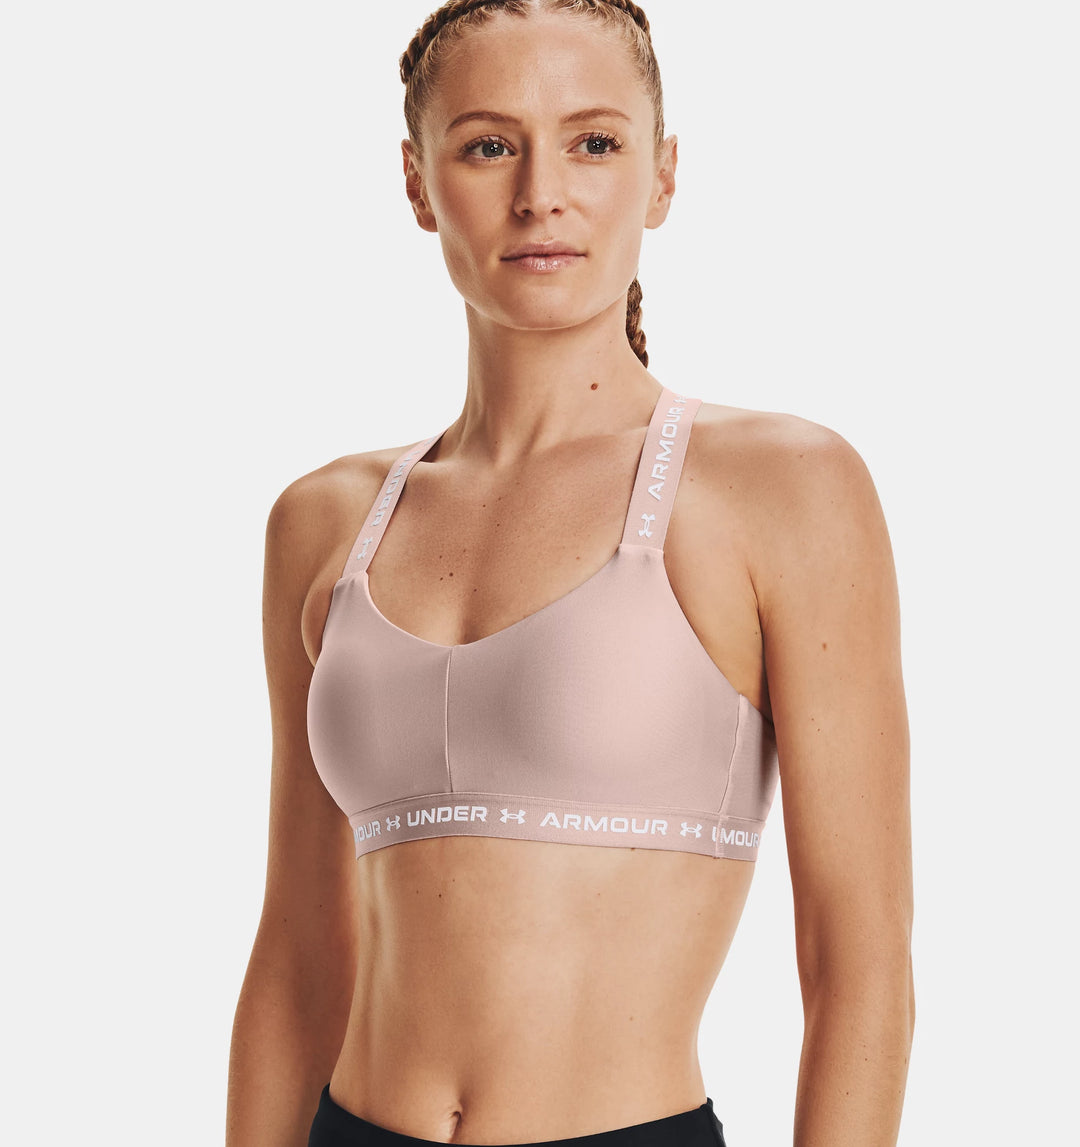 Lululemon Free To Be Serene Bra Size 4 Serene Blue Light Support C/D Cup -  $38 (26% Off Retail) - From Royal